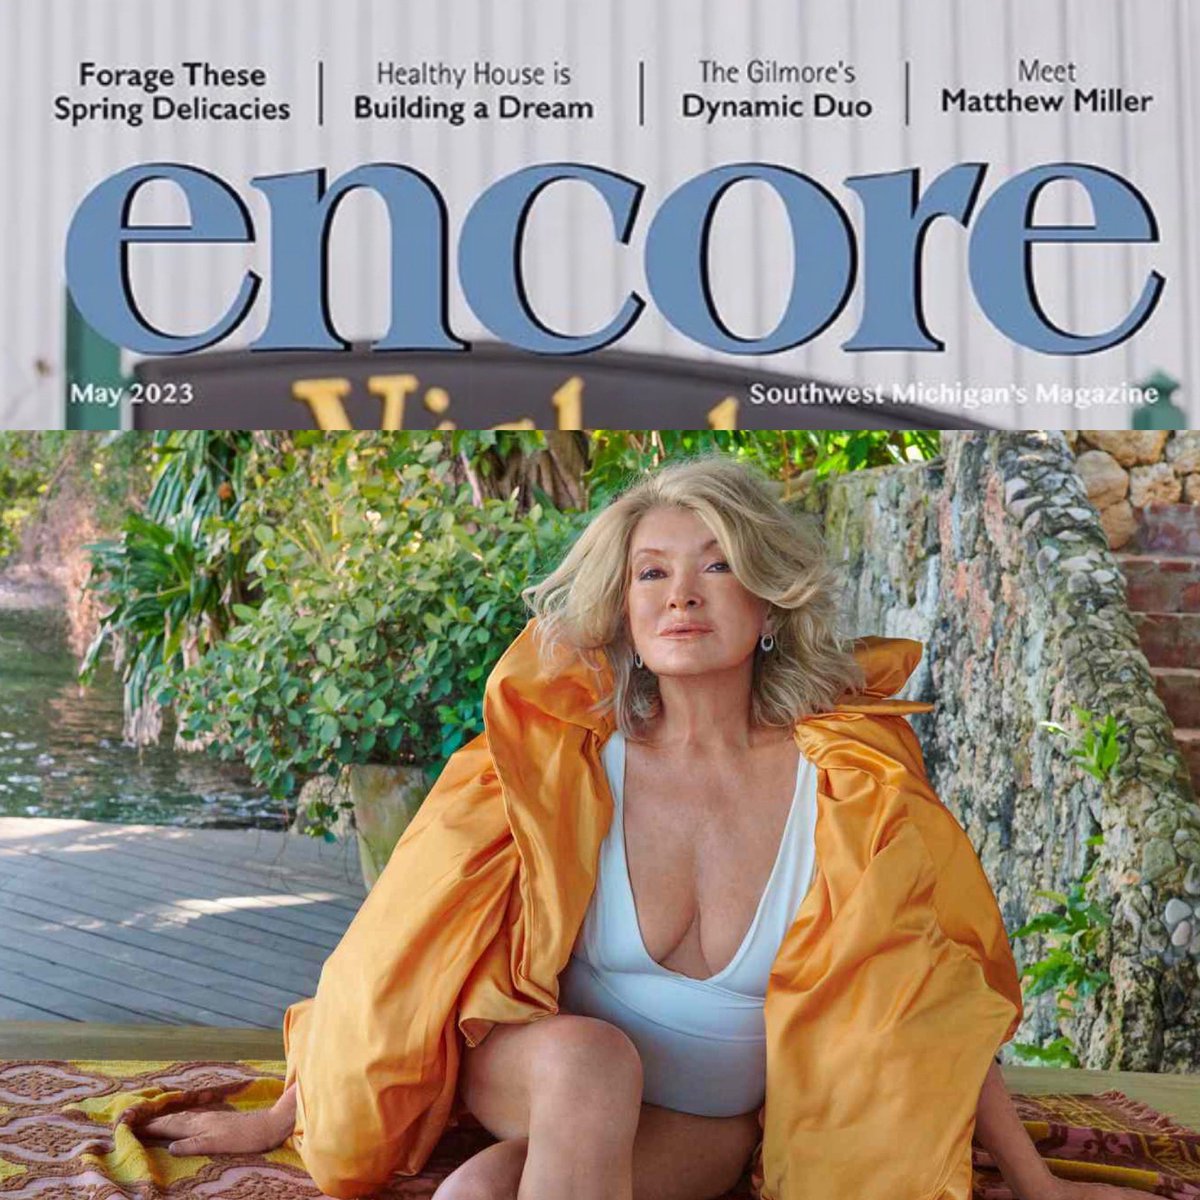 Encore Swimsuit Edition just dropped!